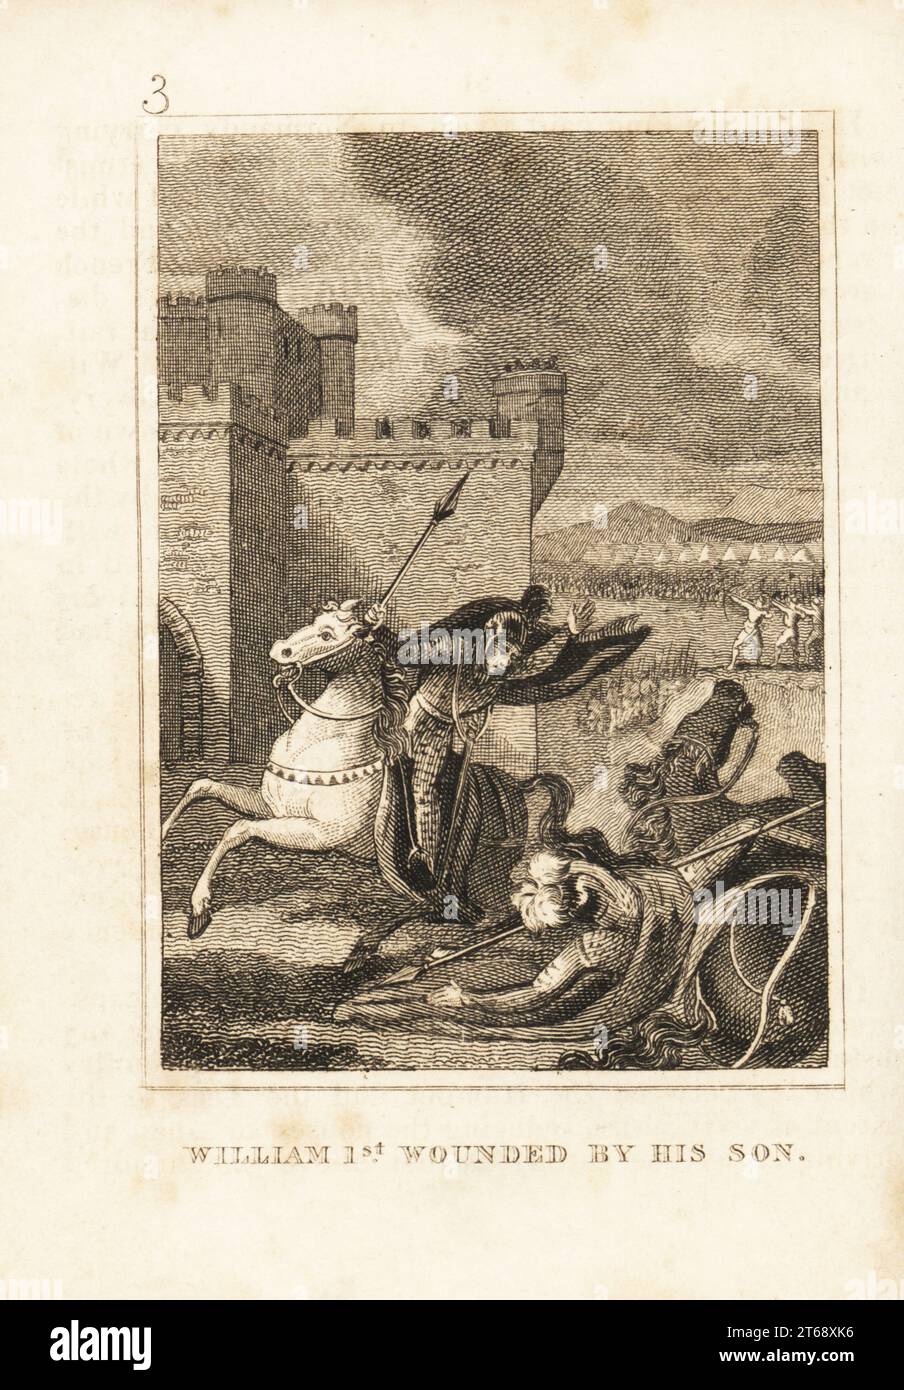 WIlliam the Conqueror knocked off his horse by his son Robert Curthose, Siege of Gerberoy Fortress, 1079. William I wounded by his son. Copperplate engraving from M. A. Jones History of England from Julius Caesar to George IV, G. Virtue, 26 Ivy Lane, London, 1836. Stock Photo